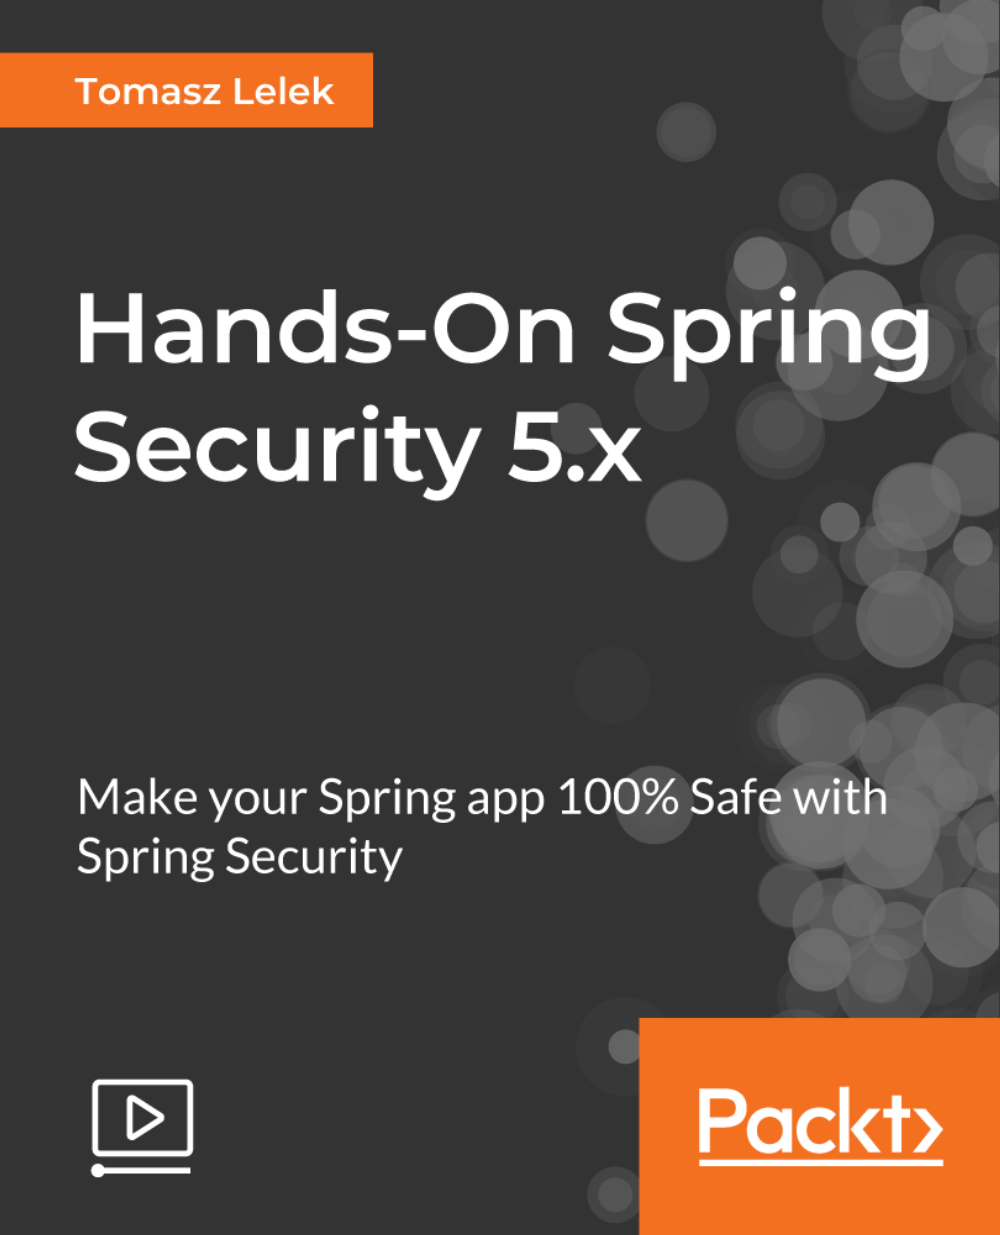 Hands-On Spring Security 5.x